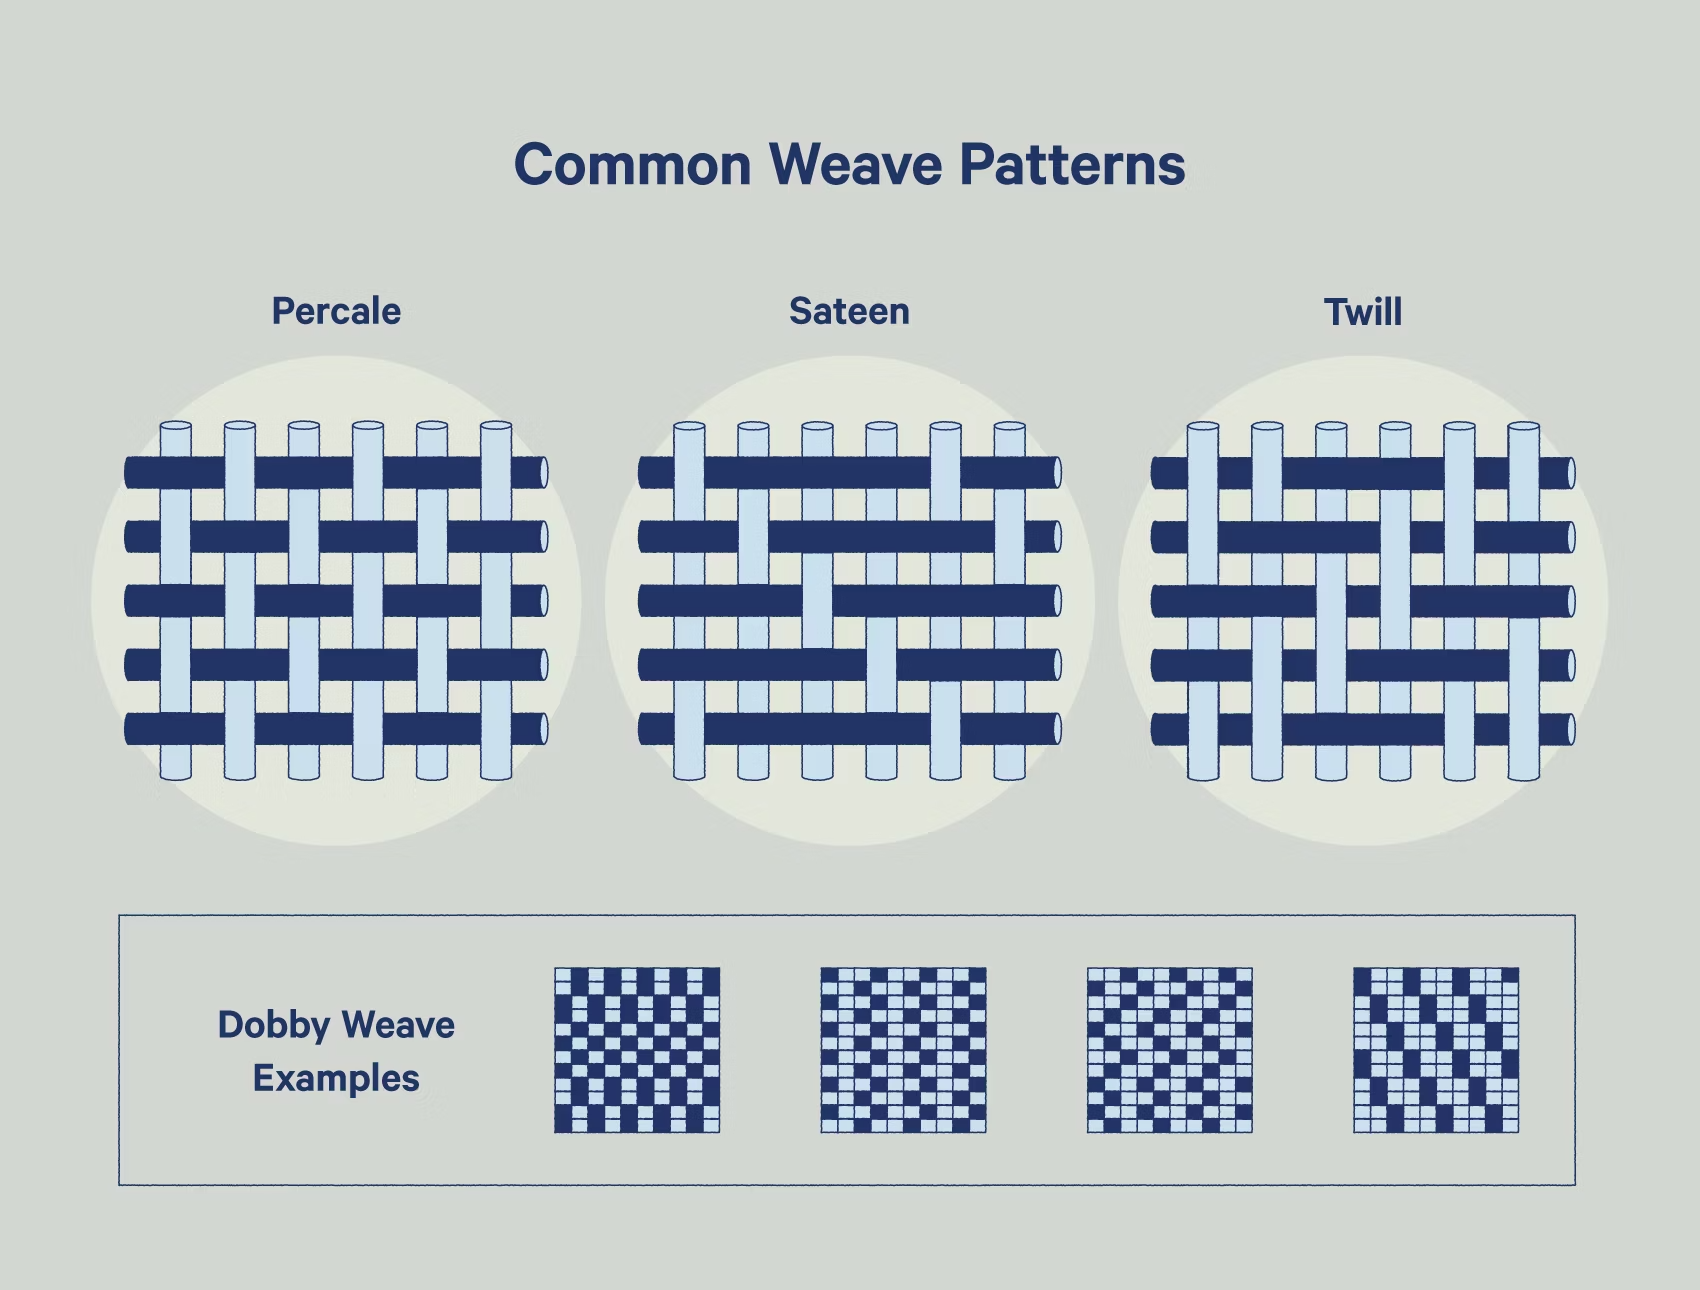 A chart titled “Common Weave Patterns” displays four weaving techniques: percale, sateen, twill, and dobby.